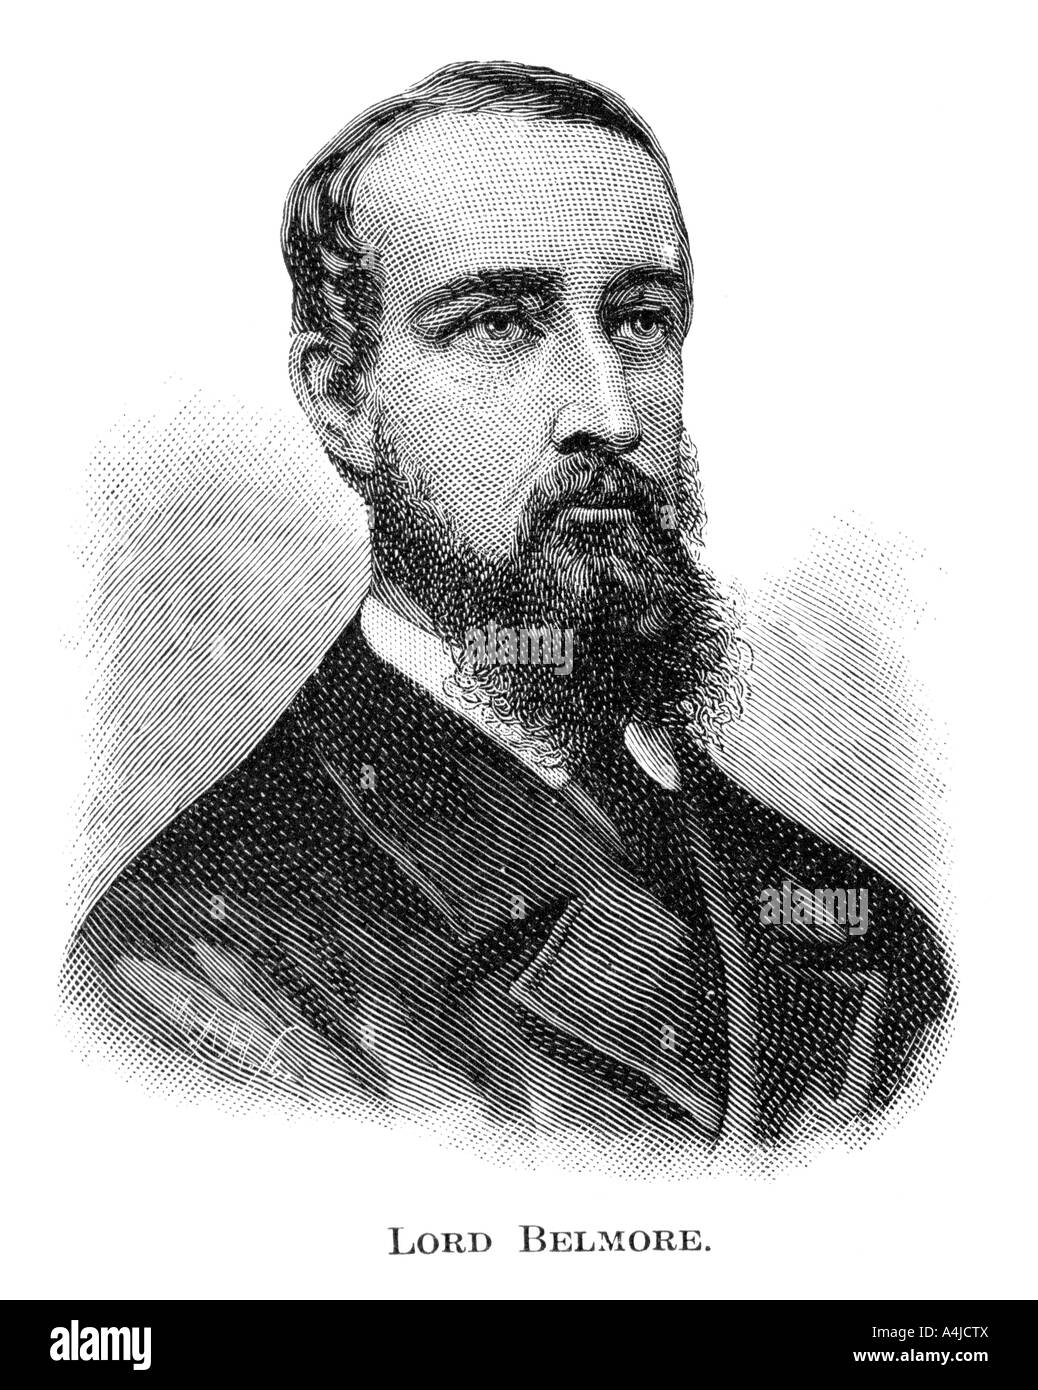 Lord Belmore, Governor of New South Wales, (1886).Artist: WA Hirschmann Stock Photo